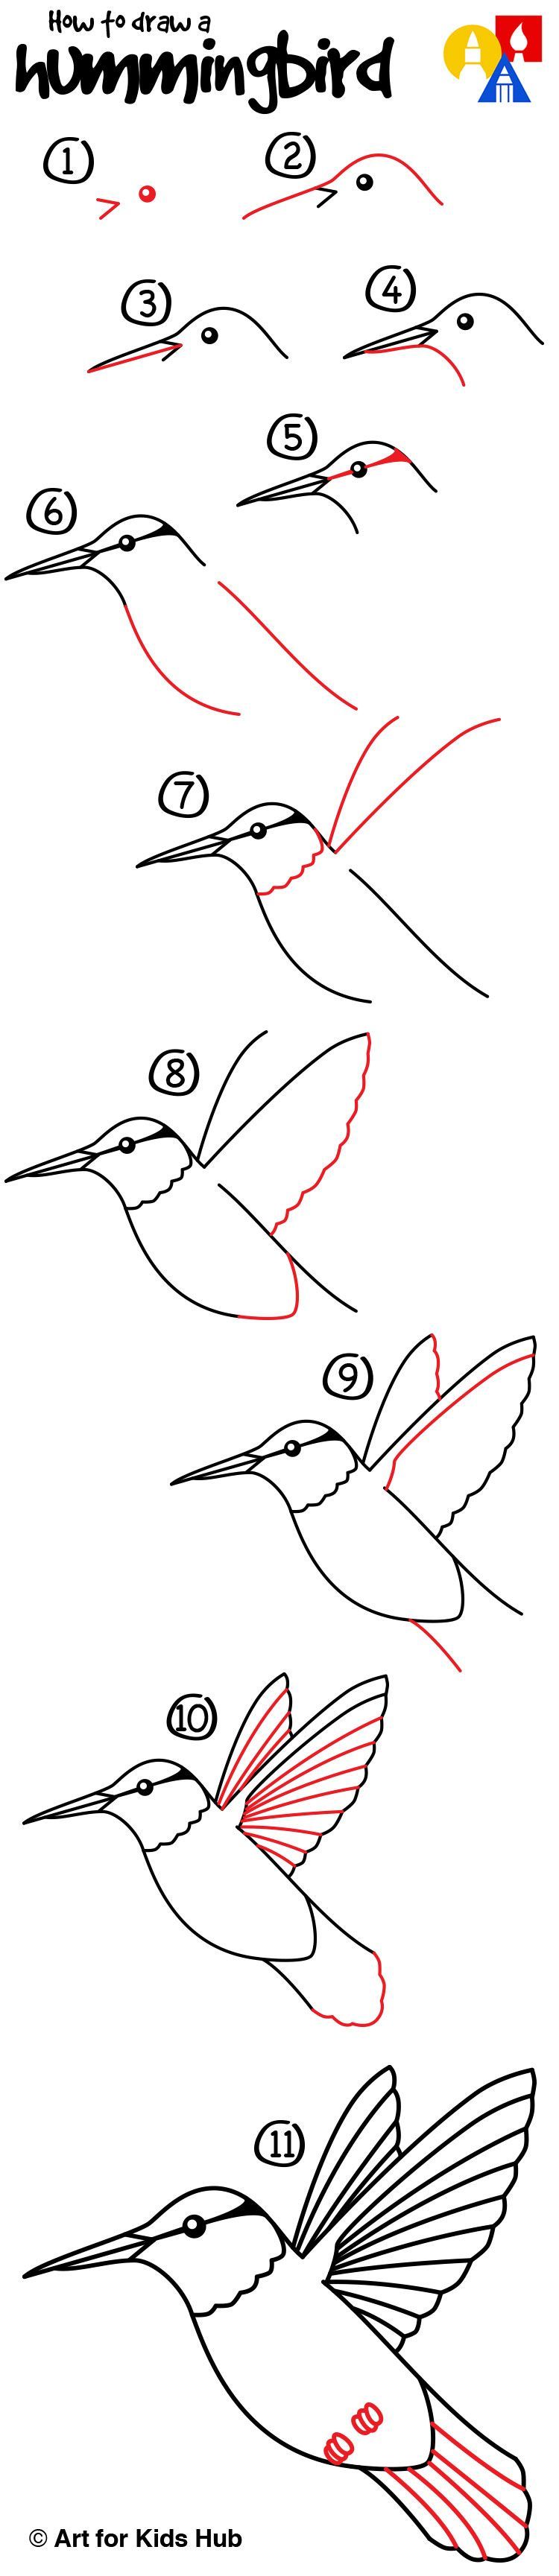 How to draw a hummingbird!